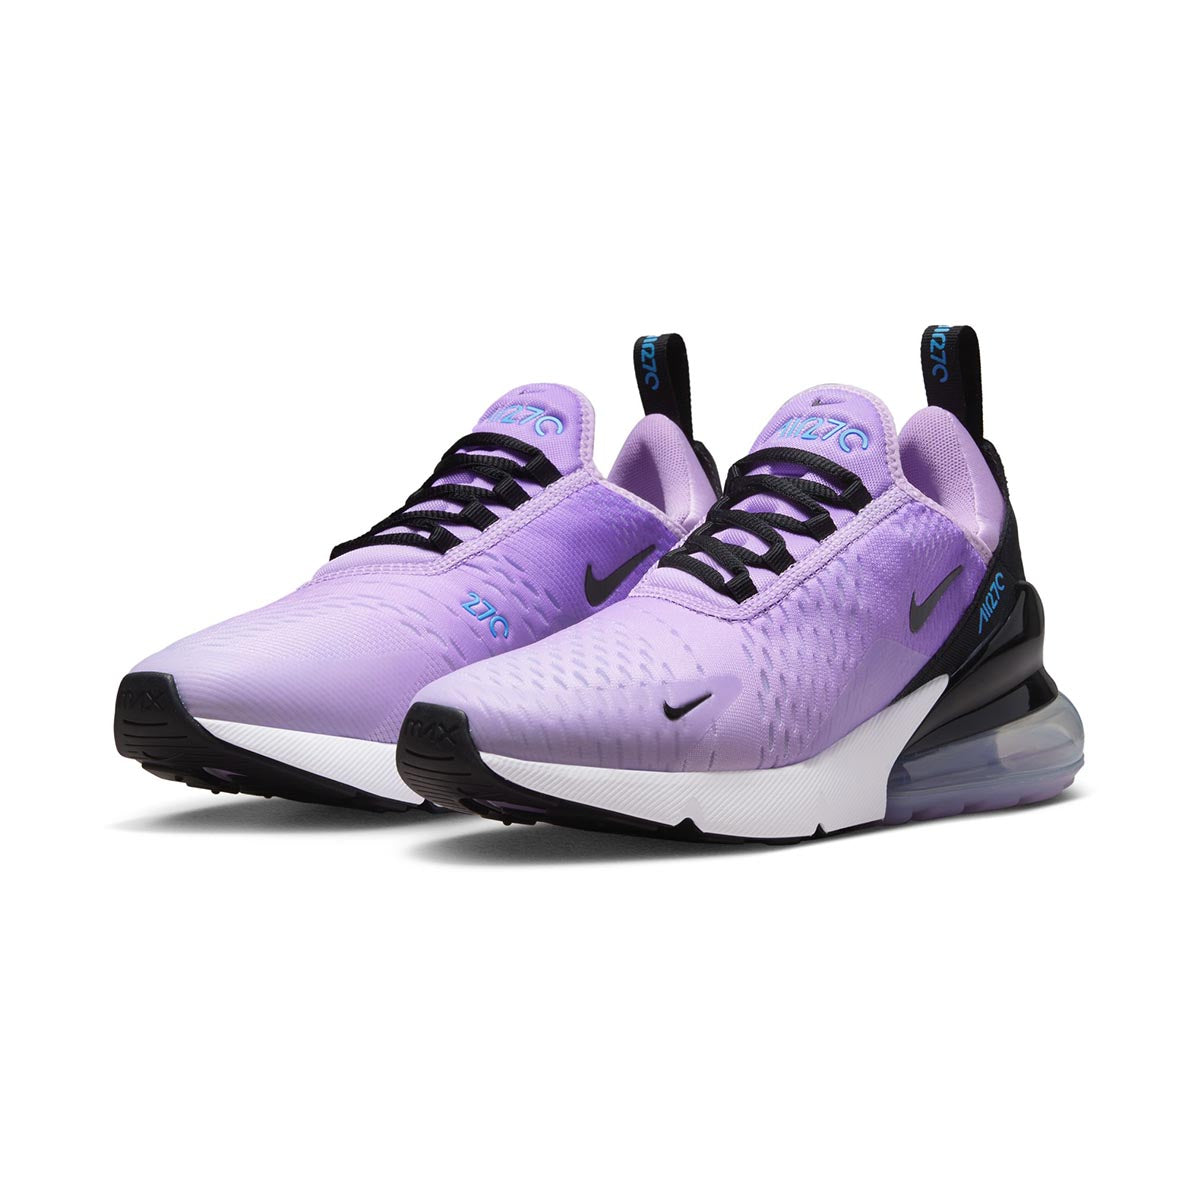 Nike Women's Air Max 270 Lilac Running Shoes